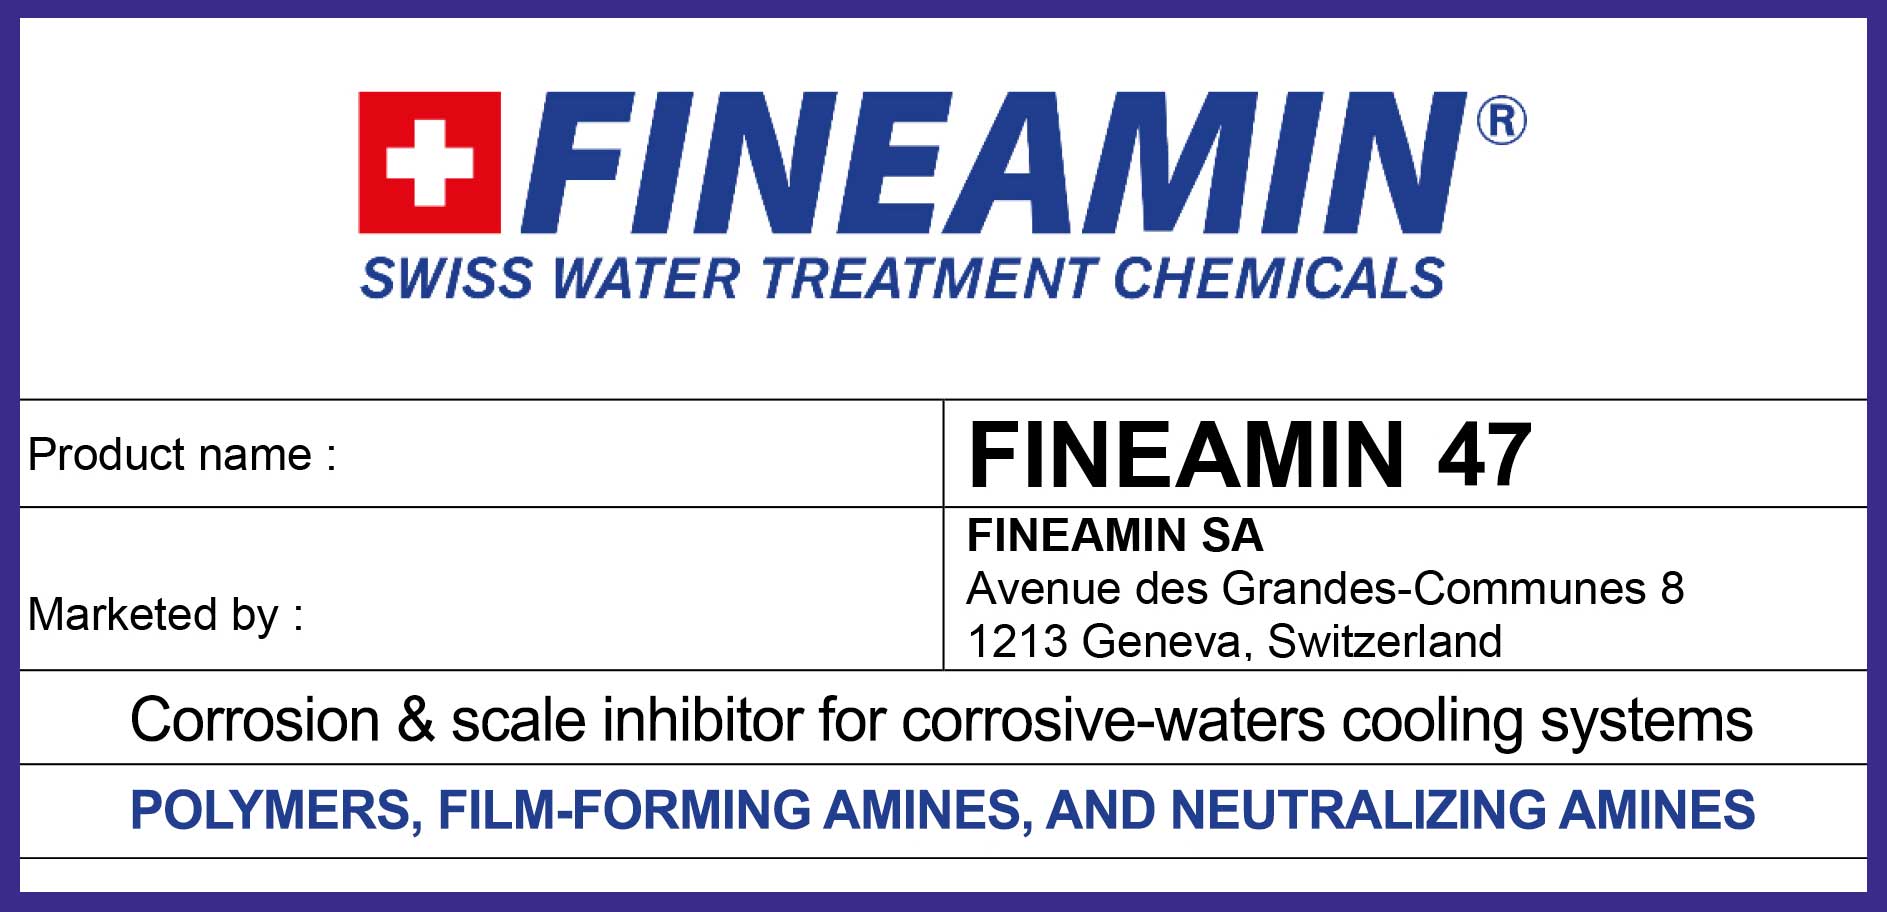 Fineamin 47 open cooling corrosion inhibitor